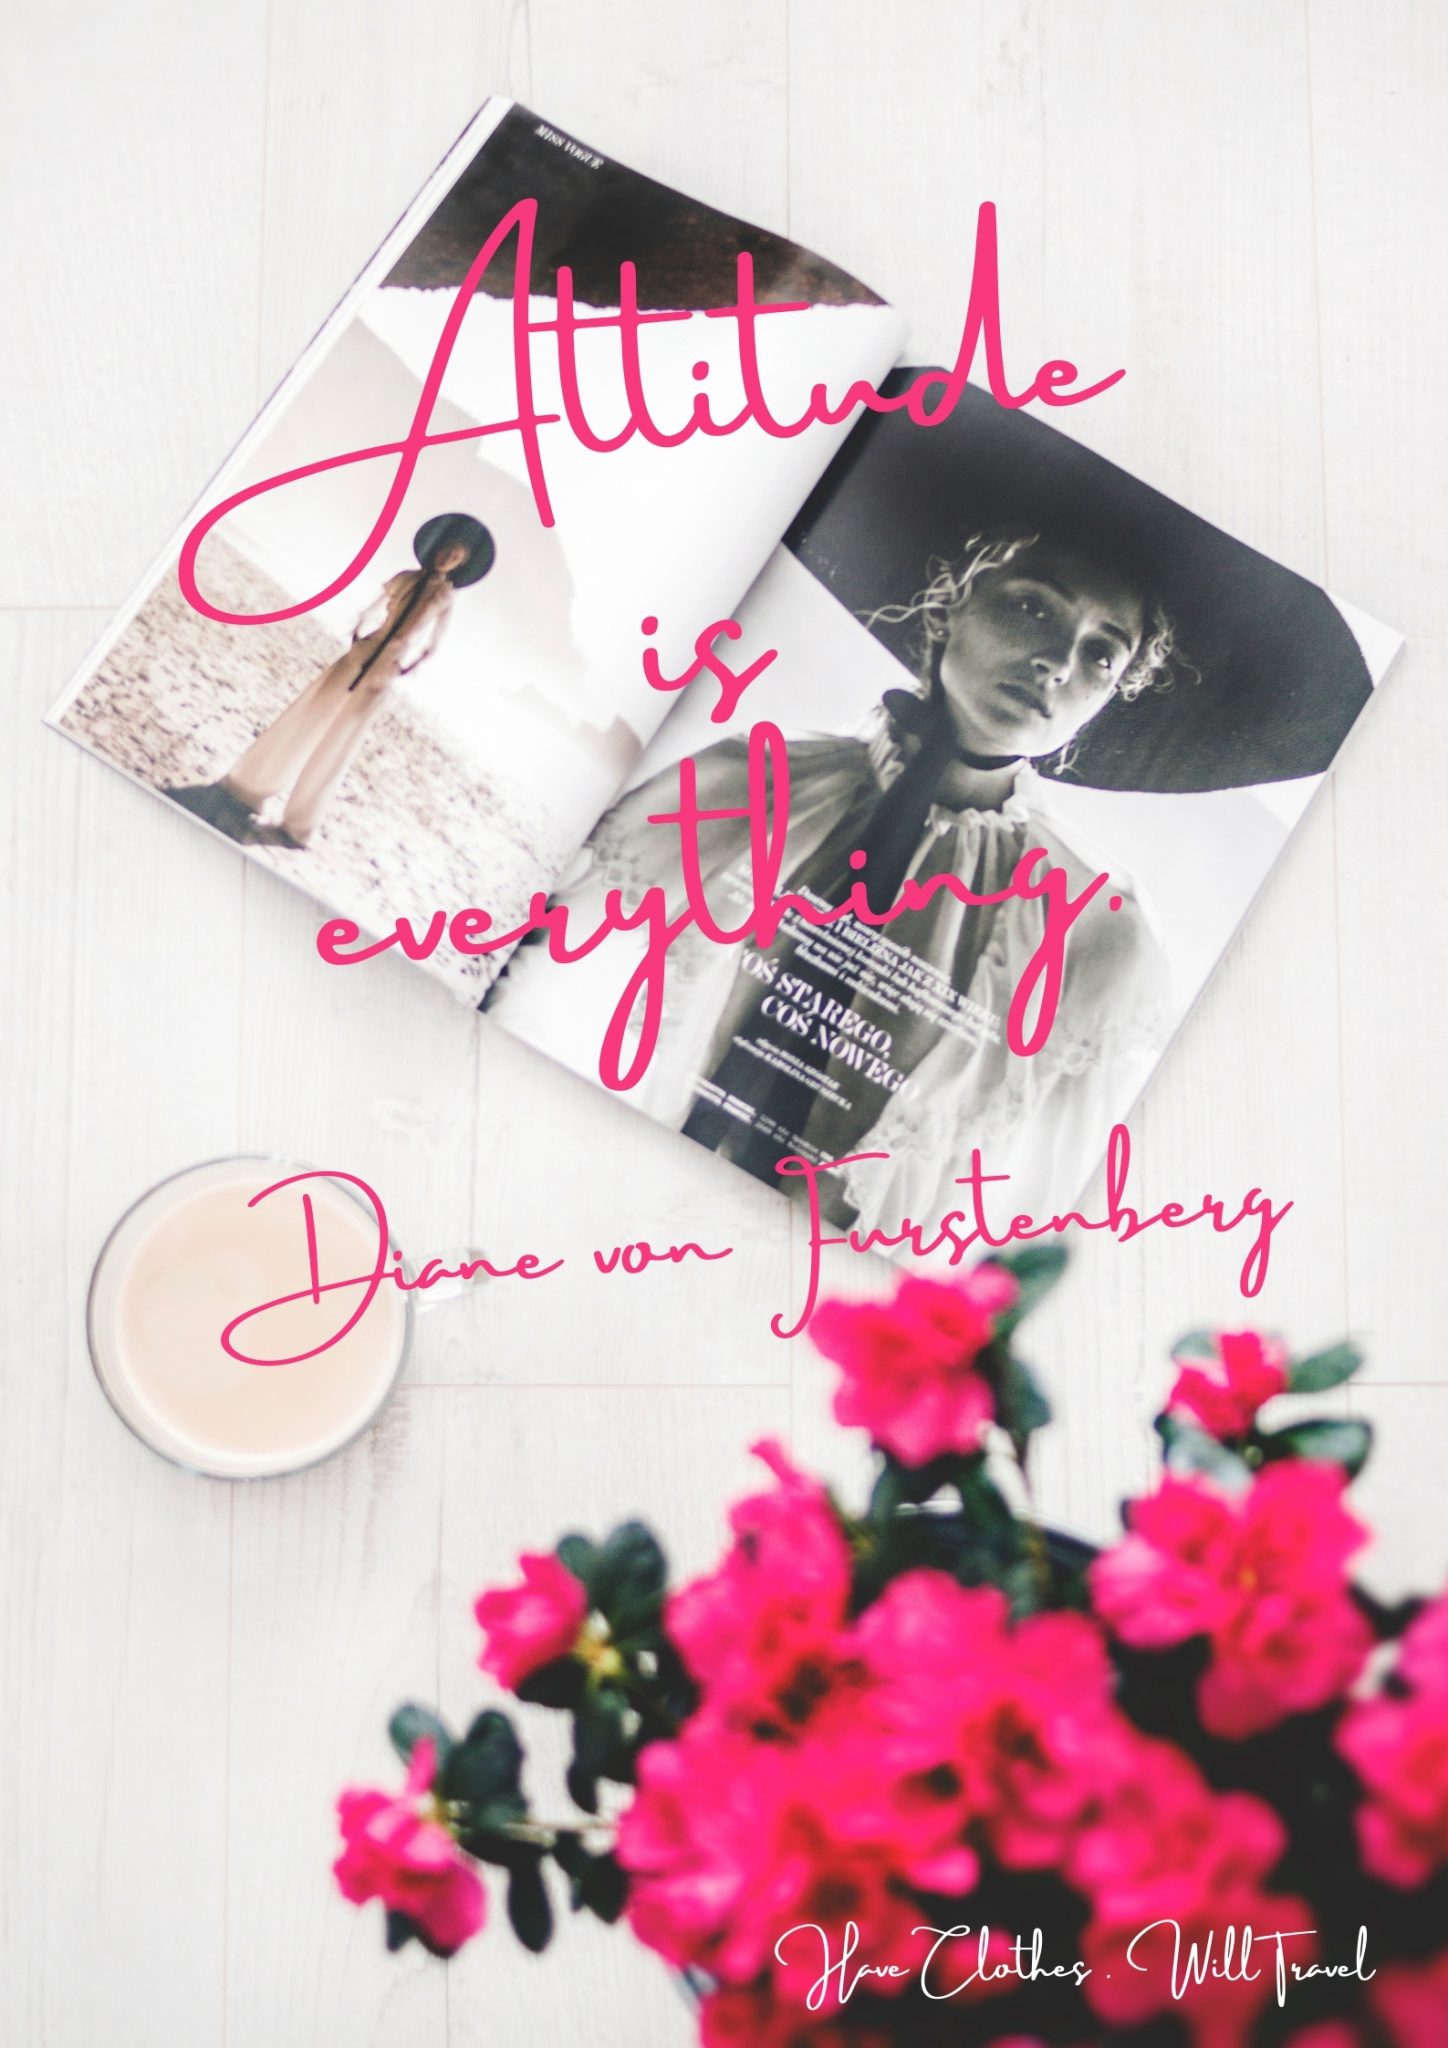 An image of an open fashion magazine, showing a beachfront photo shoot. ink text over the image reads, "Attitude is everything. –Diane von Furstenberg"